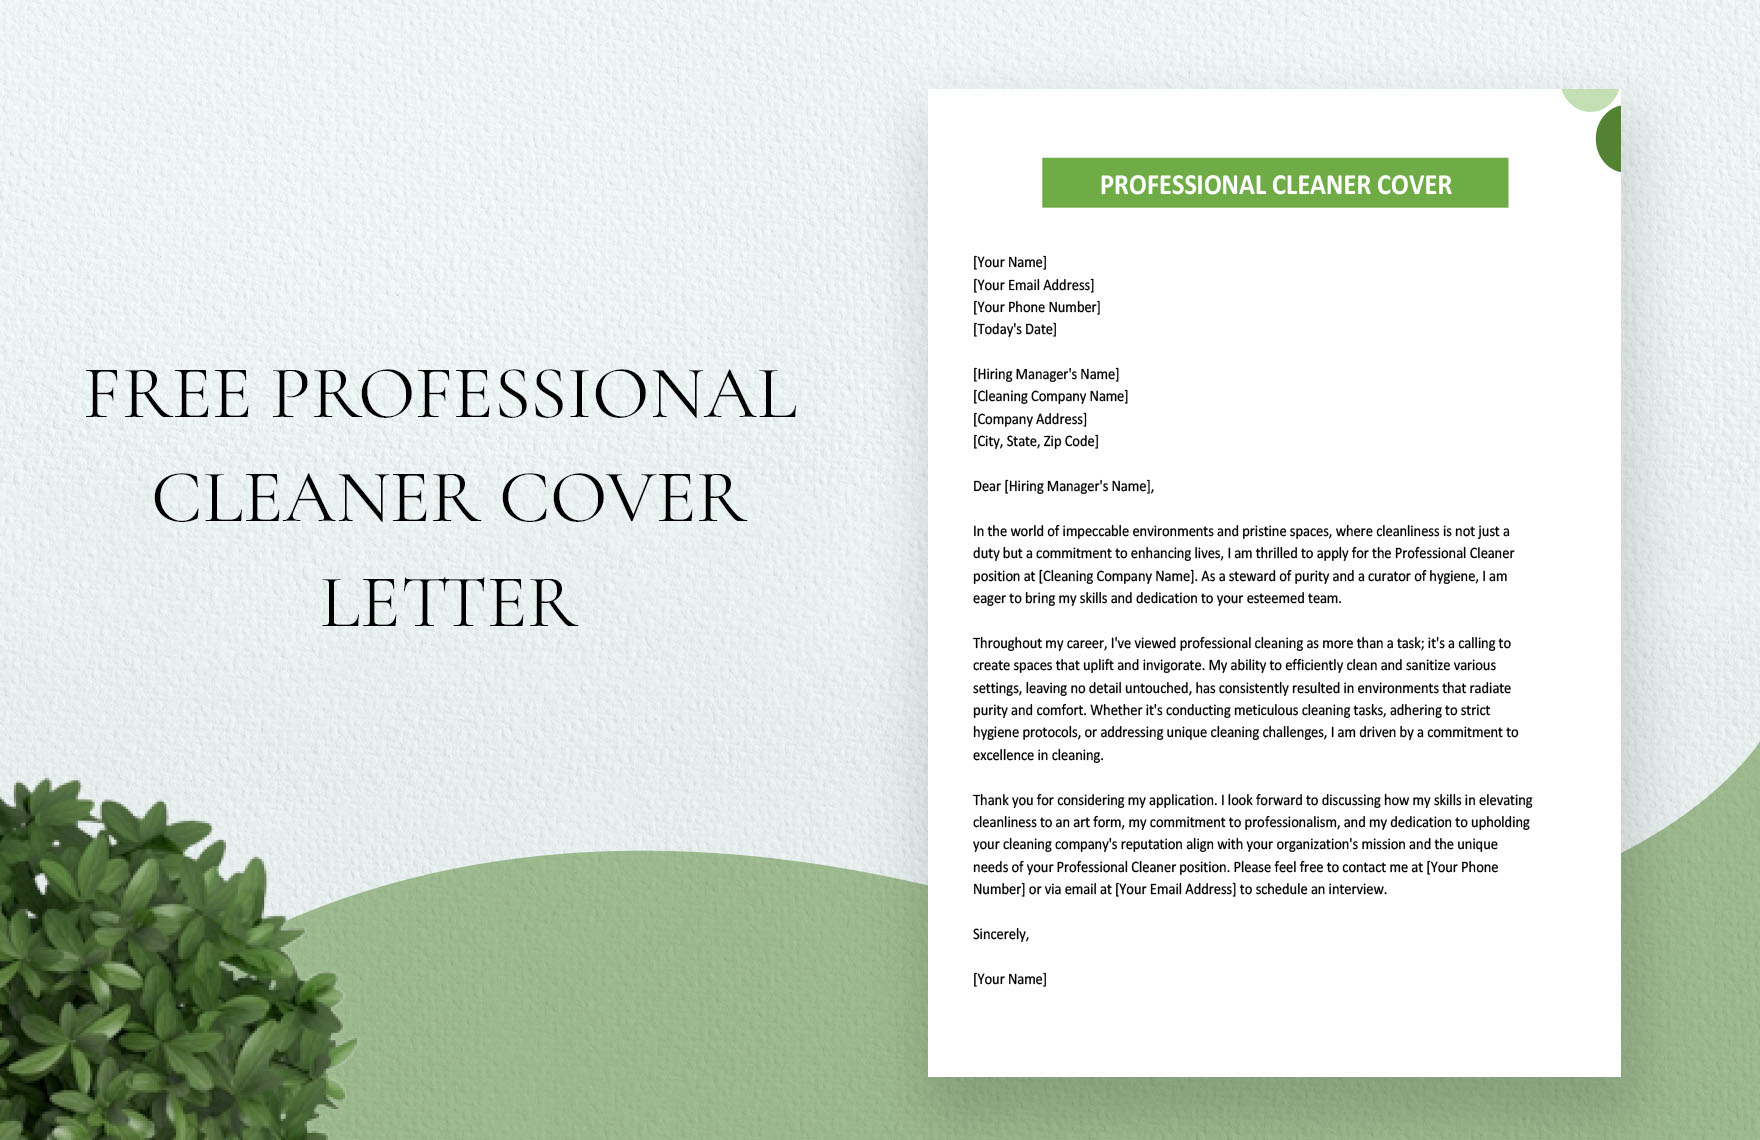 Professional Cleaner Cover Letter